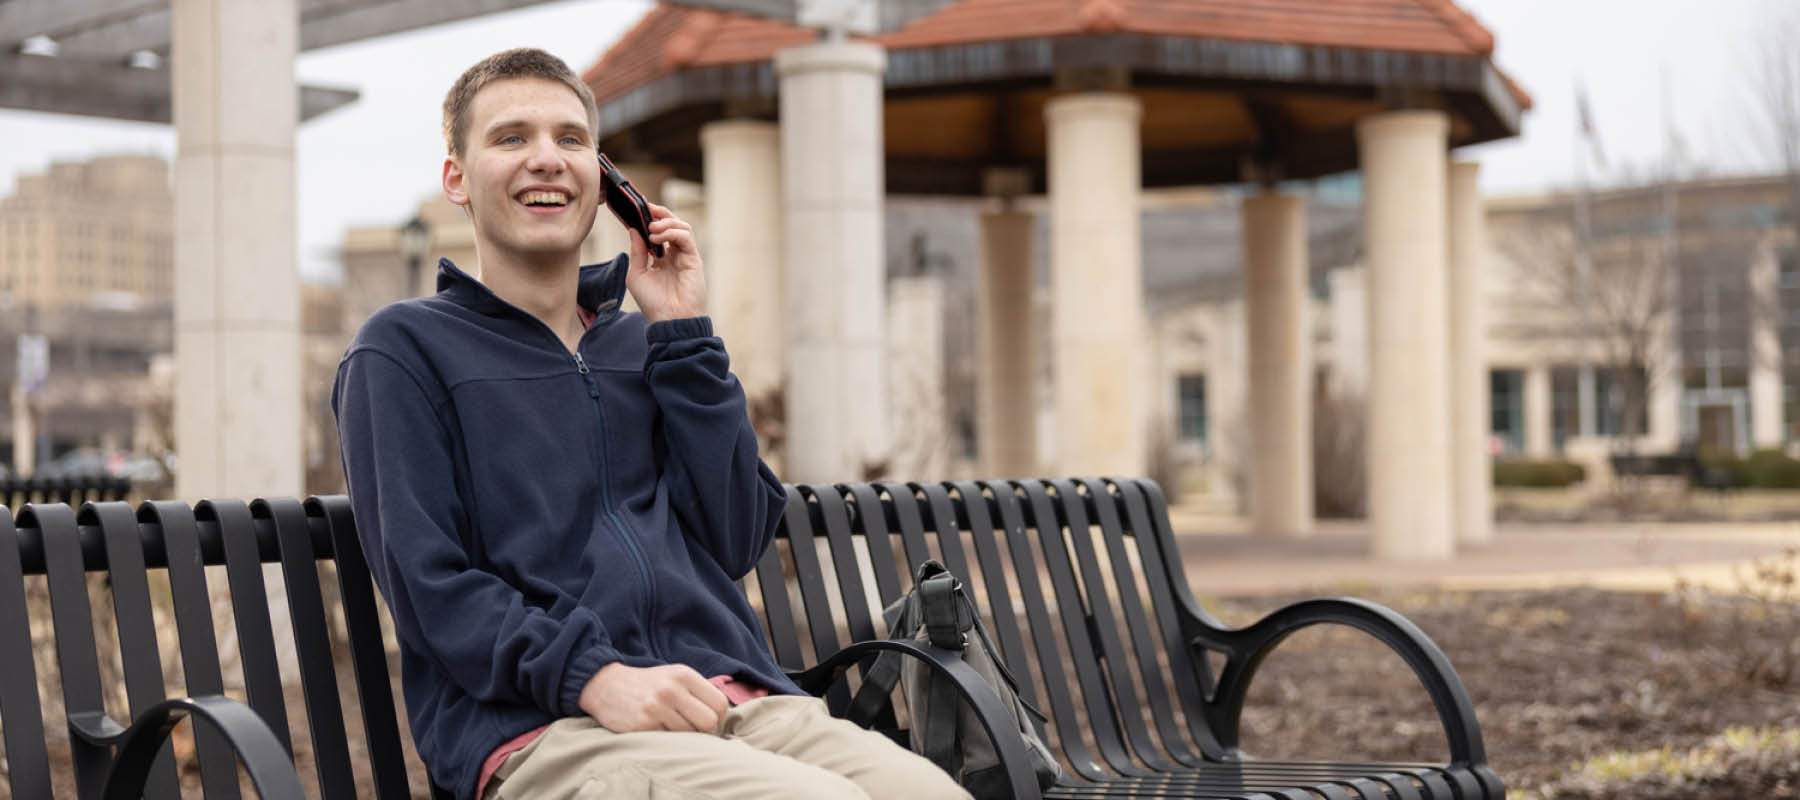 Young man with Autism sitting on bench talking on phone and smiling